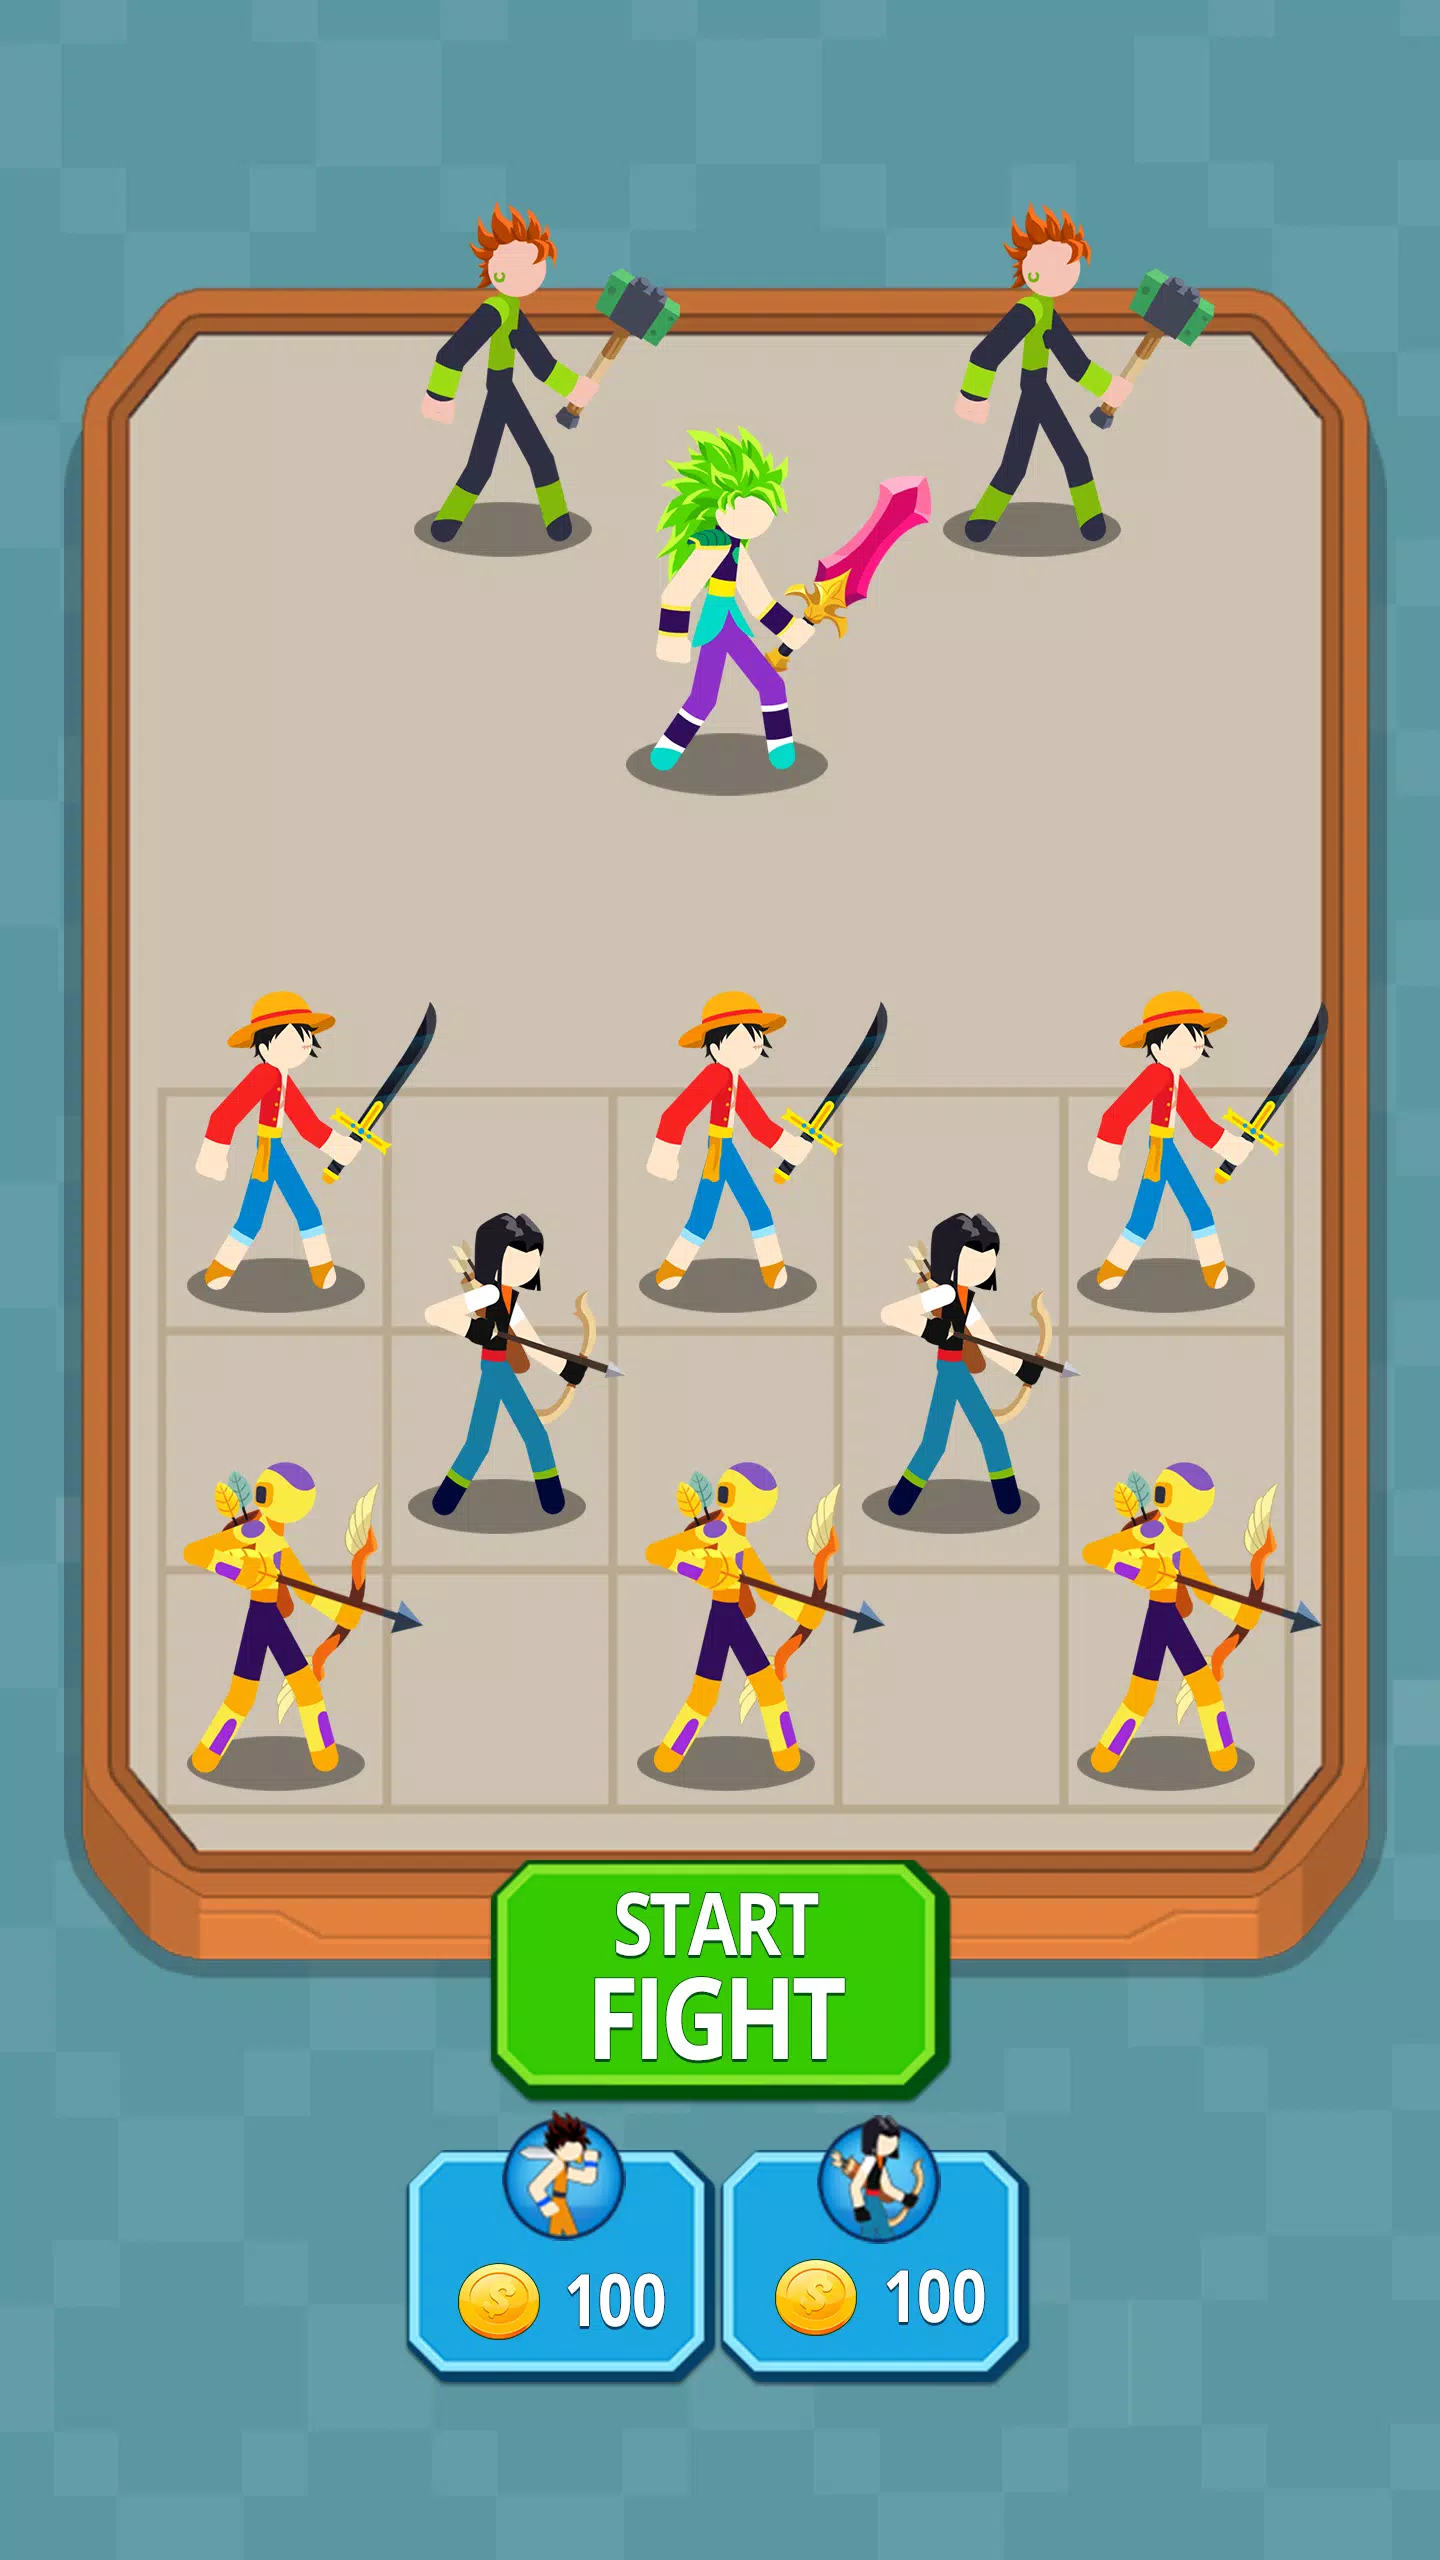 How to Unlock all characters in Stickman Warriors for free 